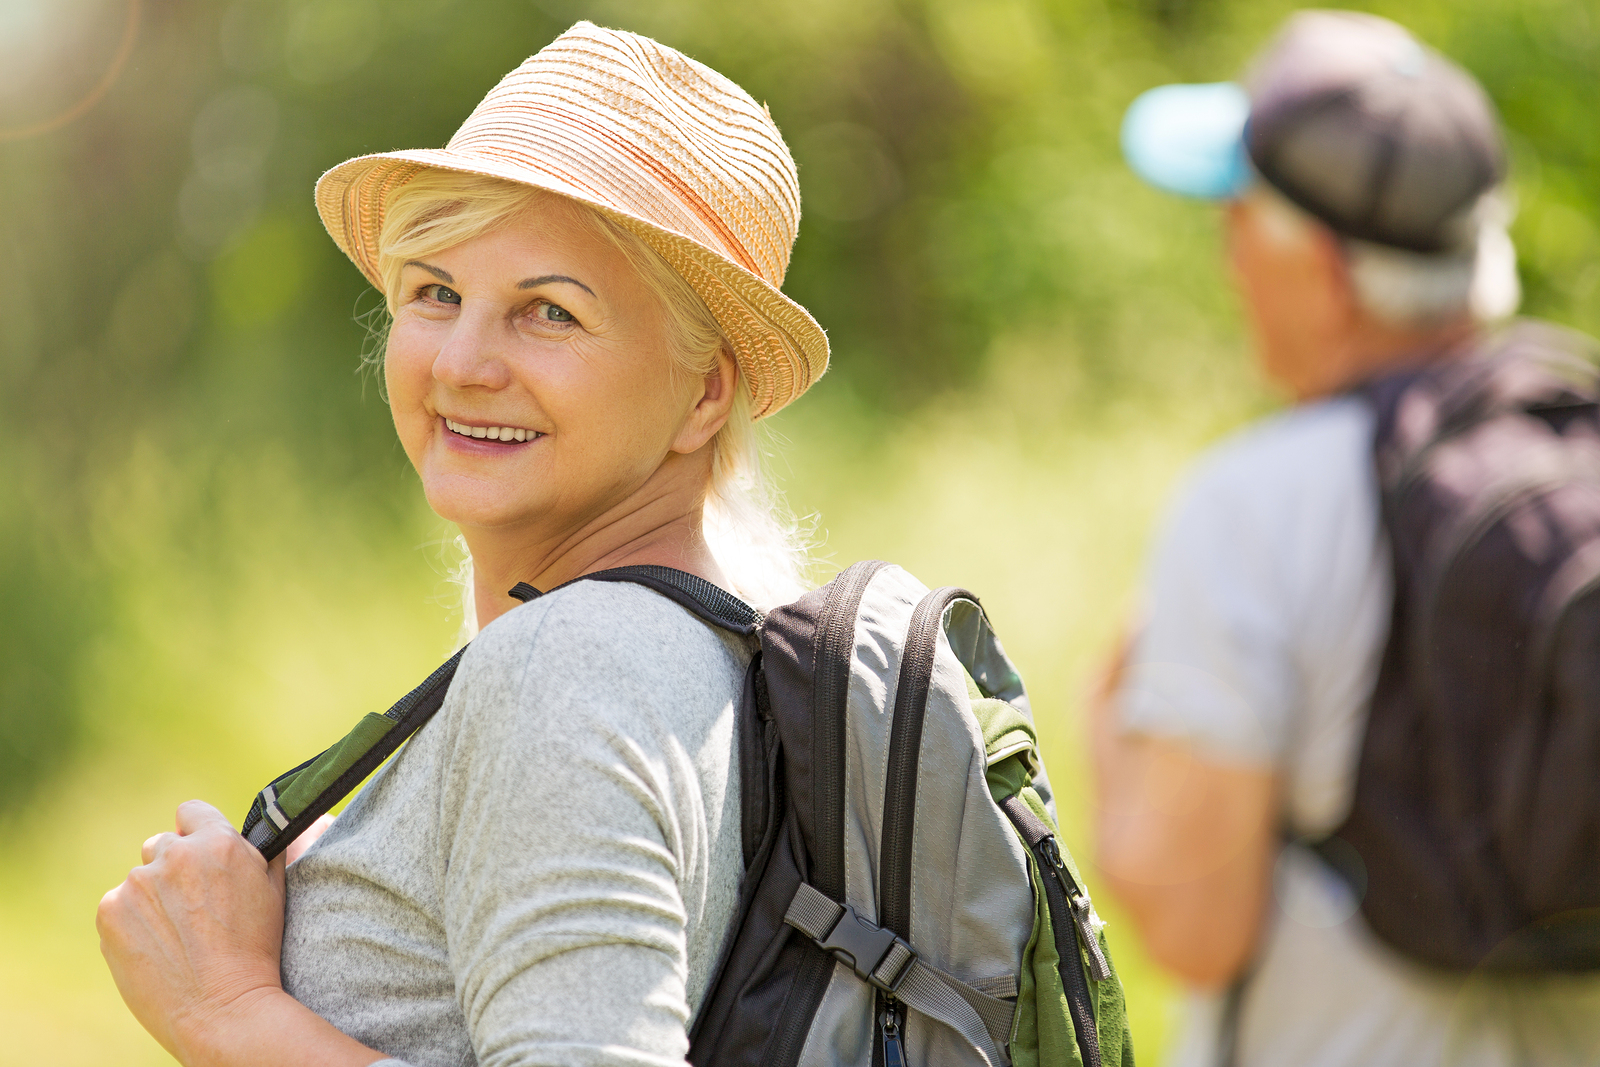 woman hiking - how to find your ideal exercise